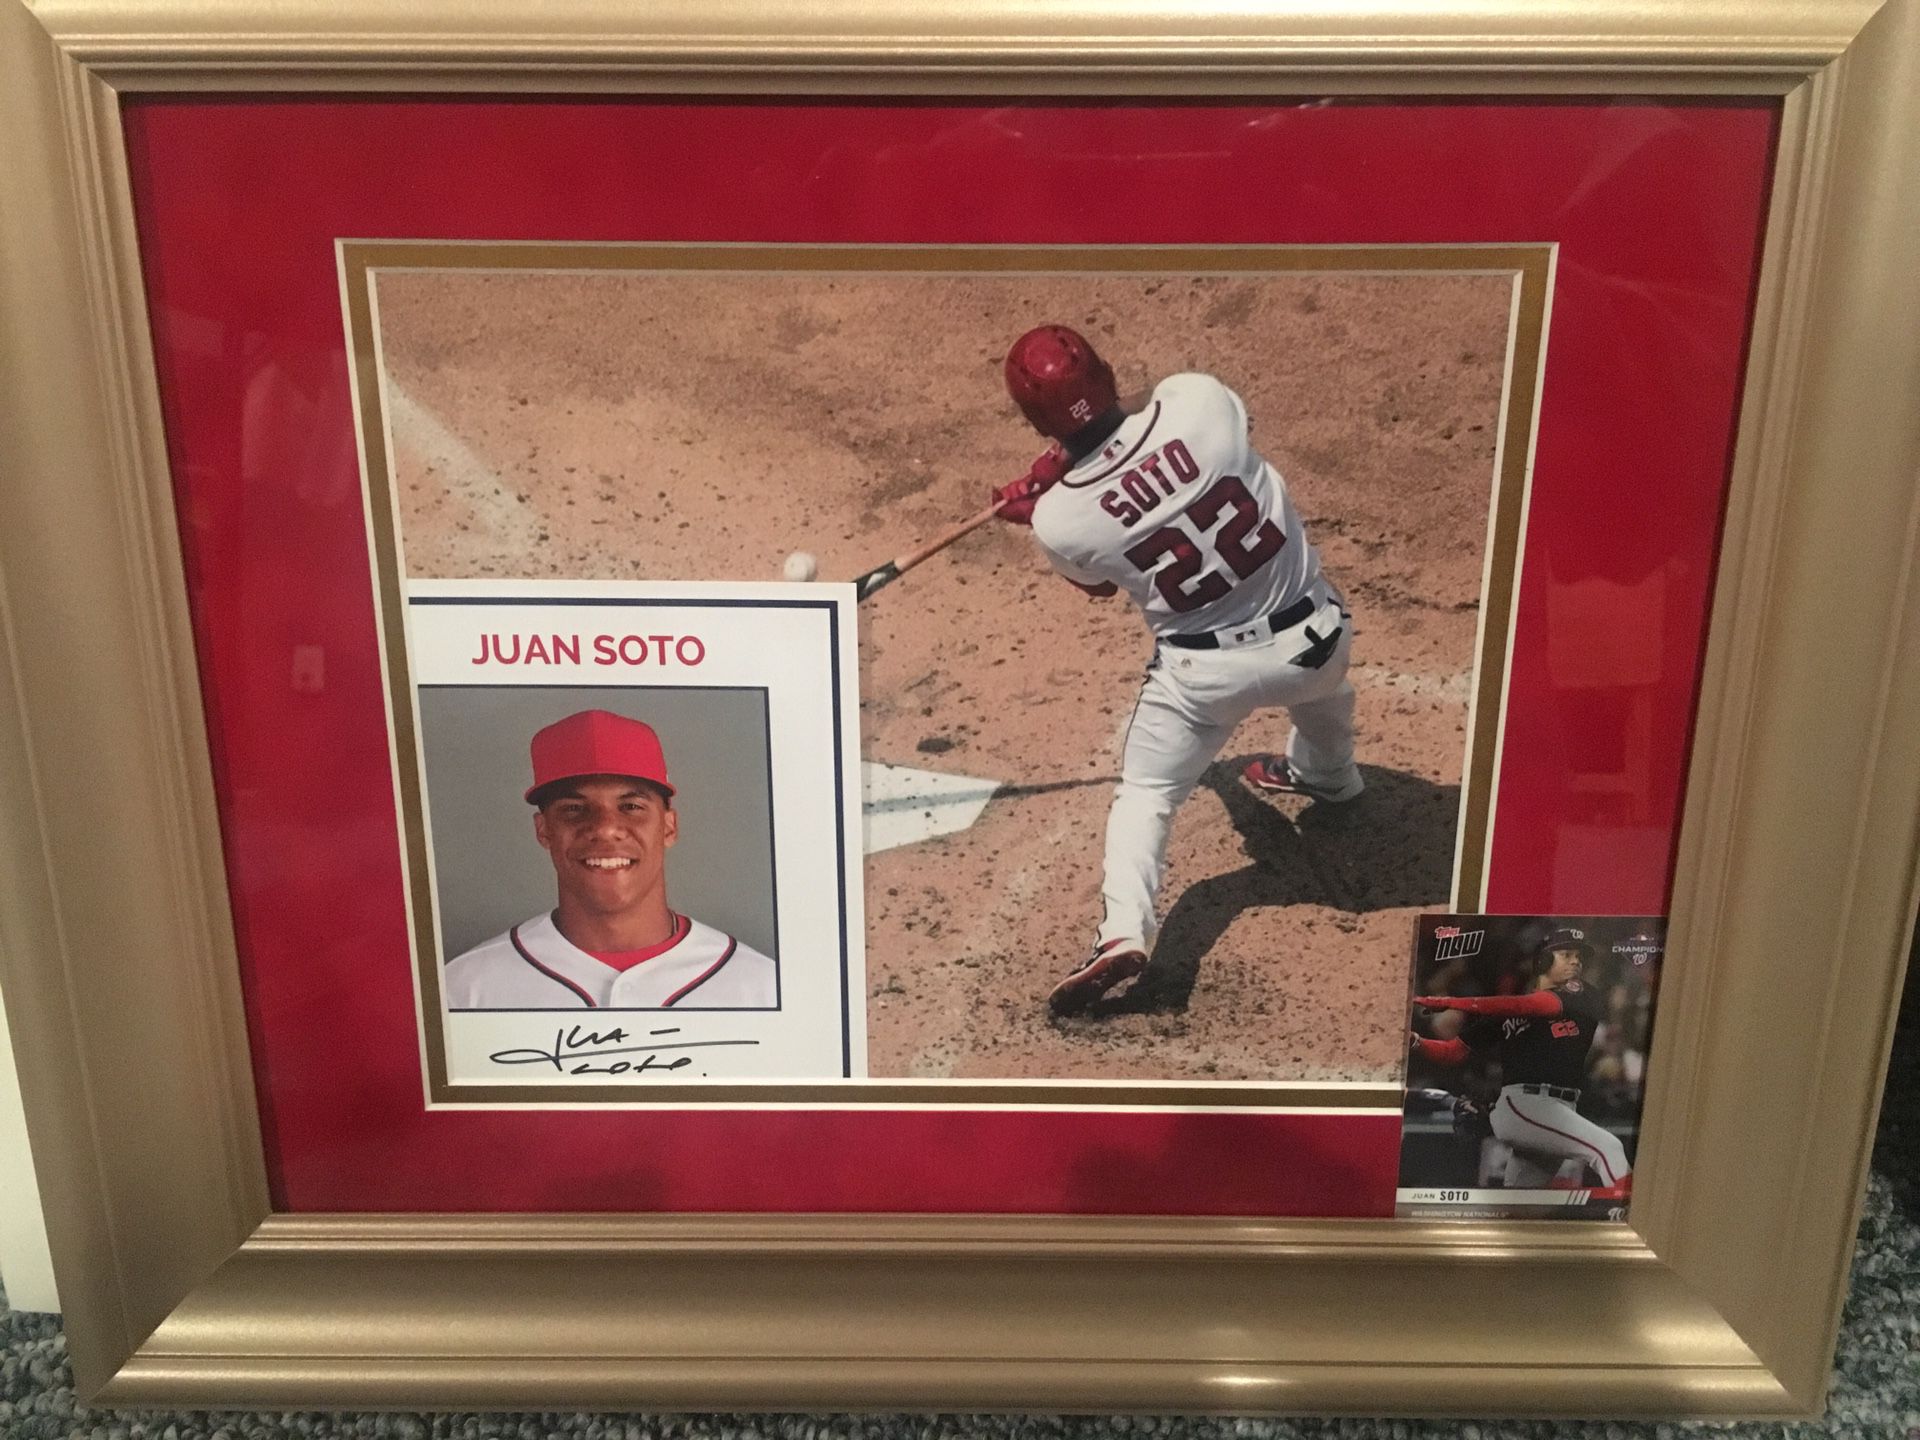 Juan Soto matted and framed autographed Soto with Limited edition Topps now baseball card